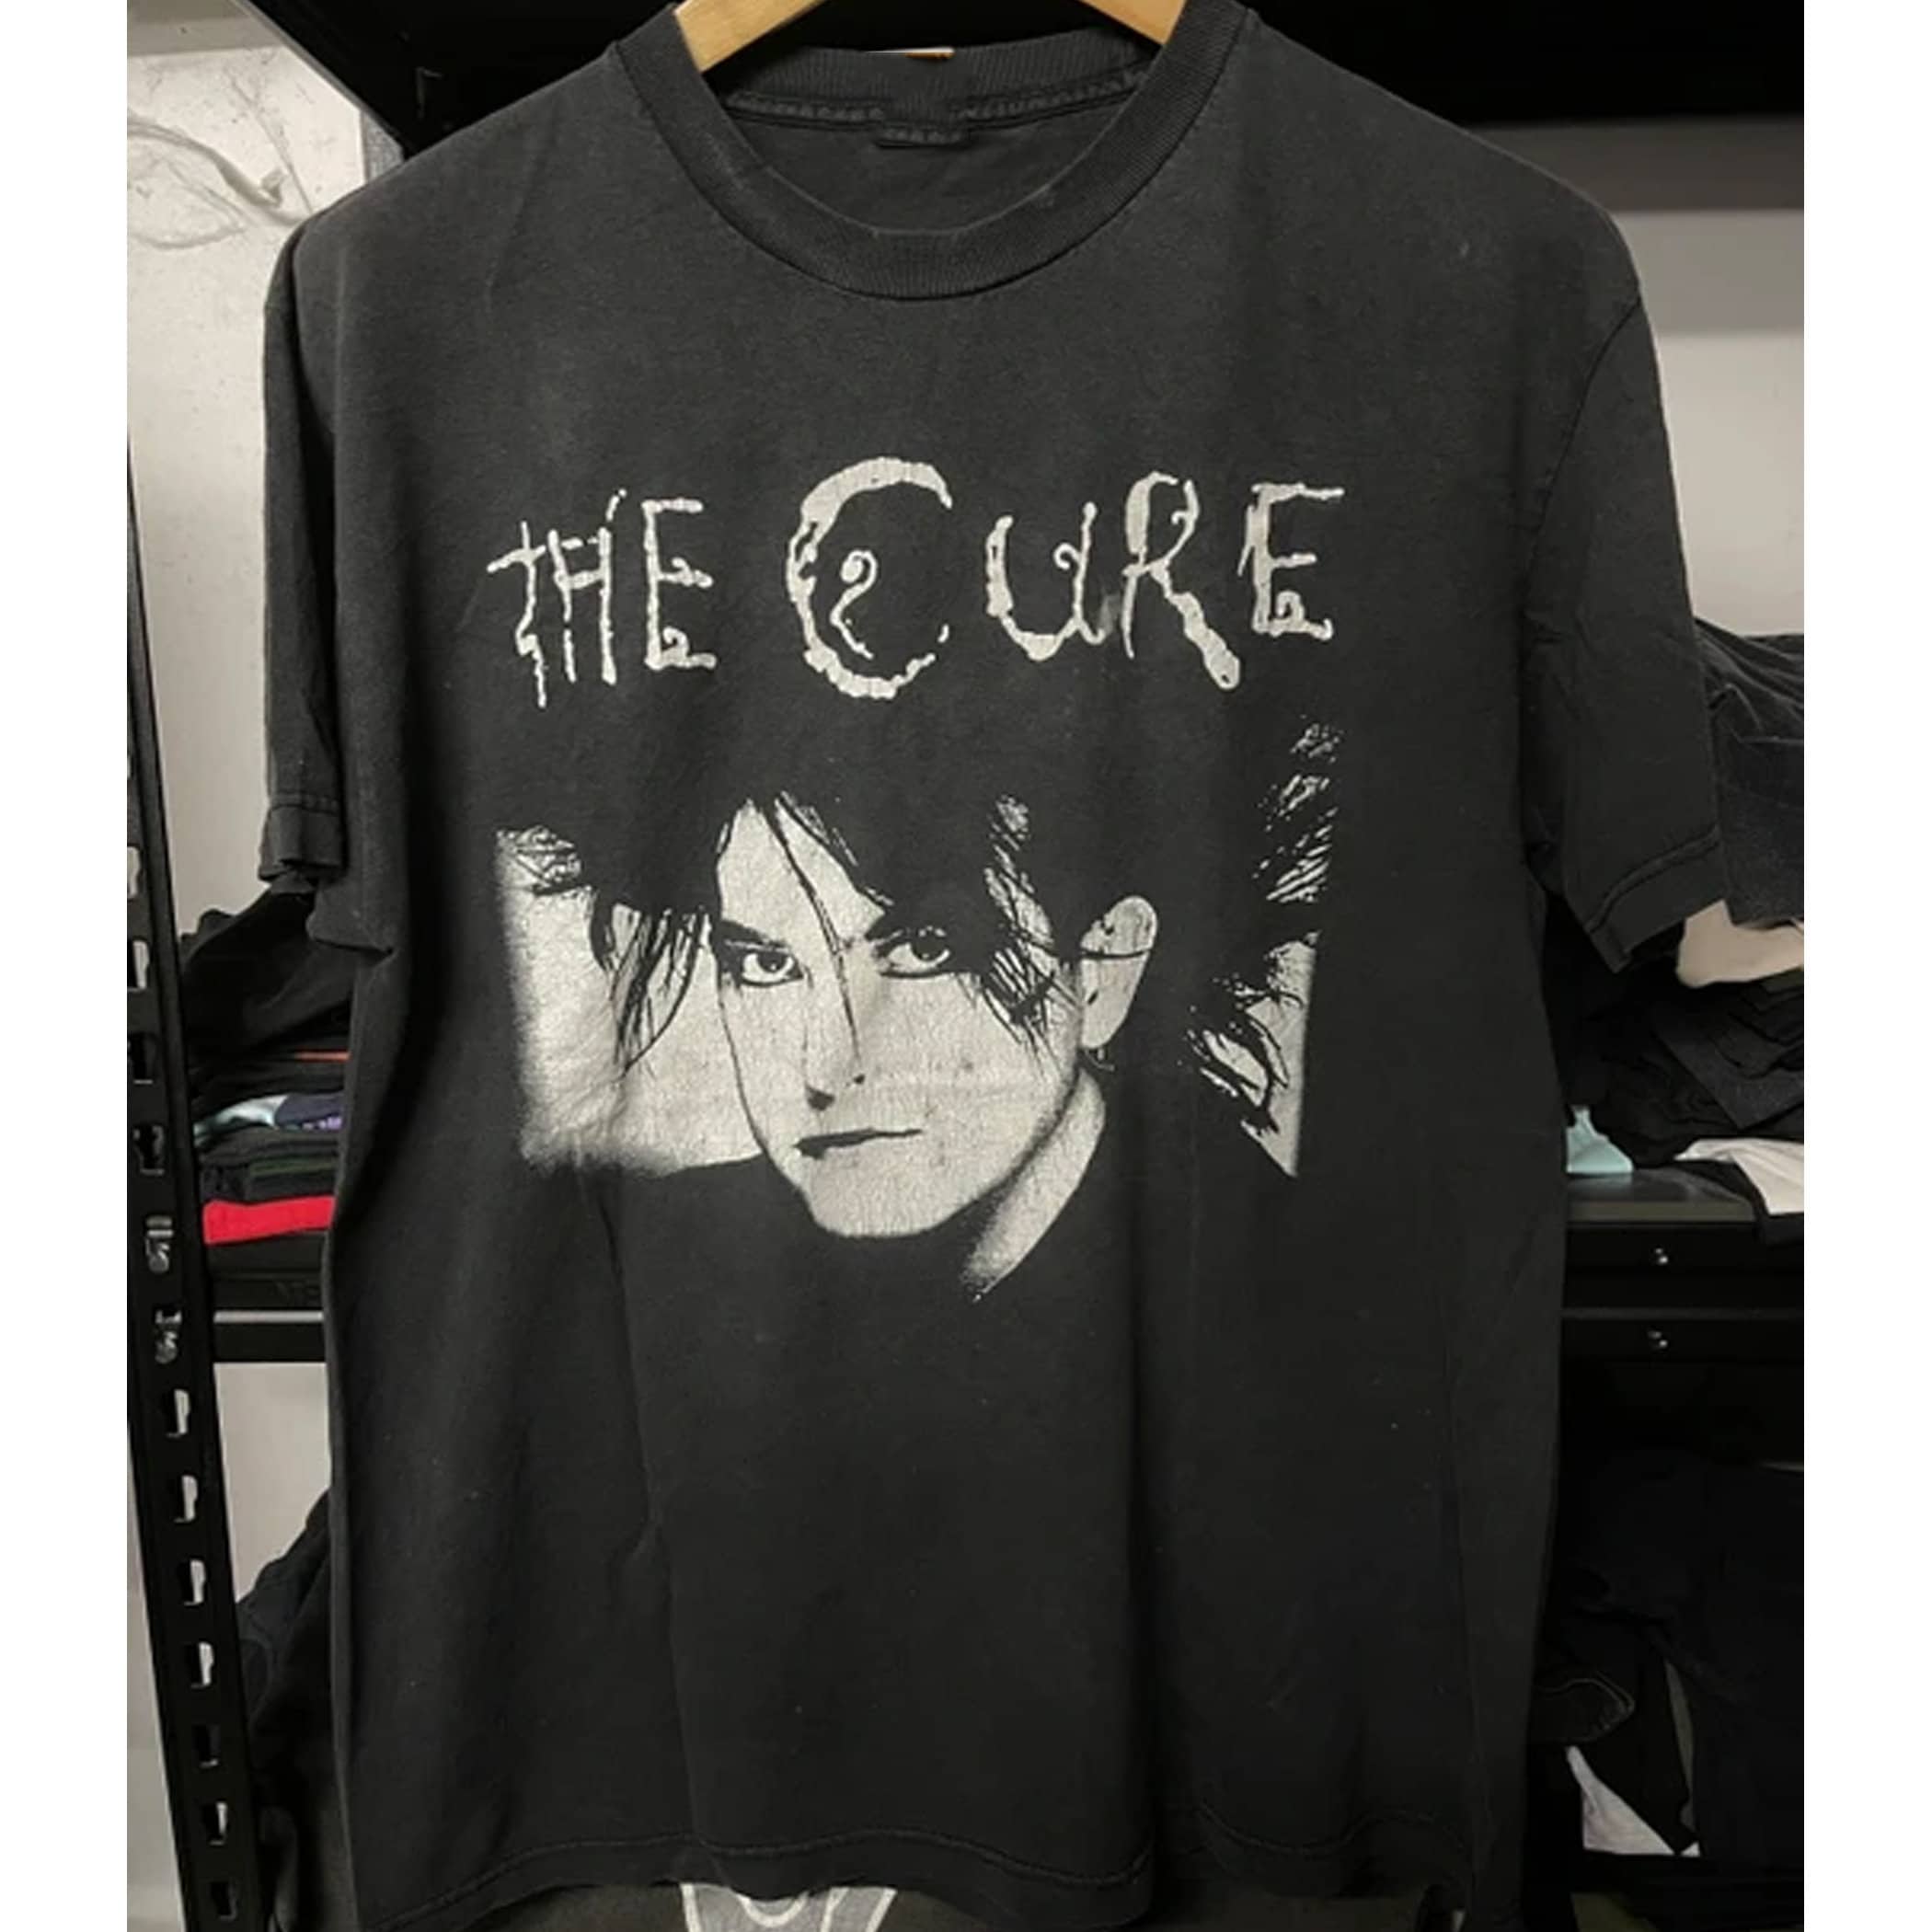 Discover The Cure shirt, vintage the cure 90s promotion shirt